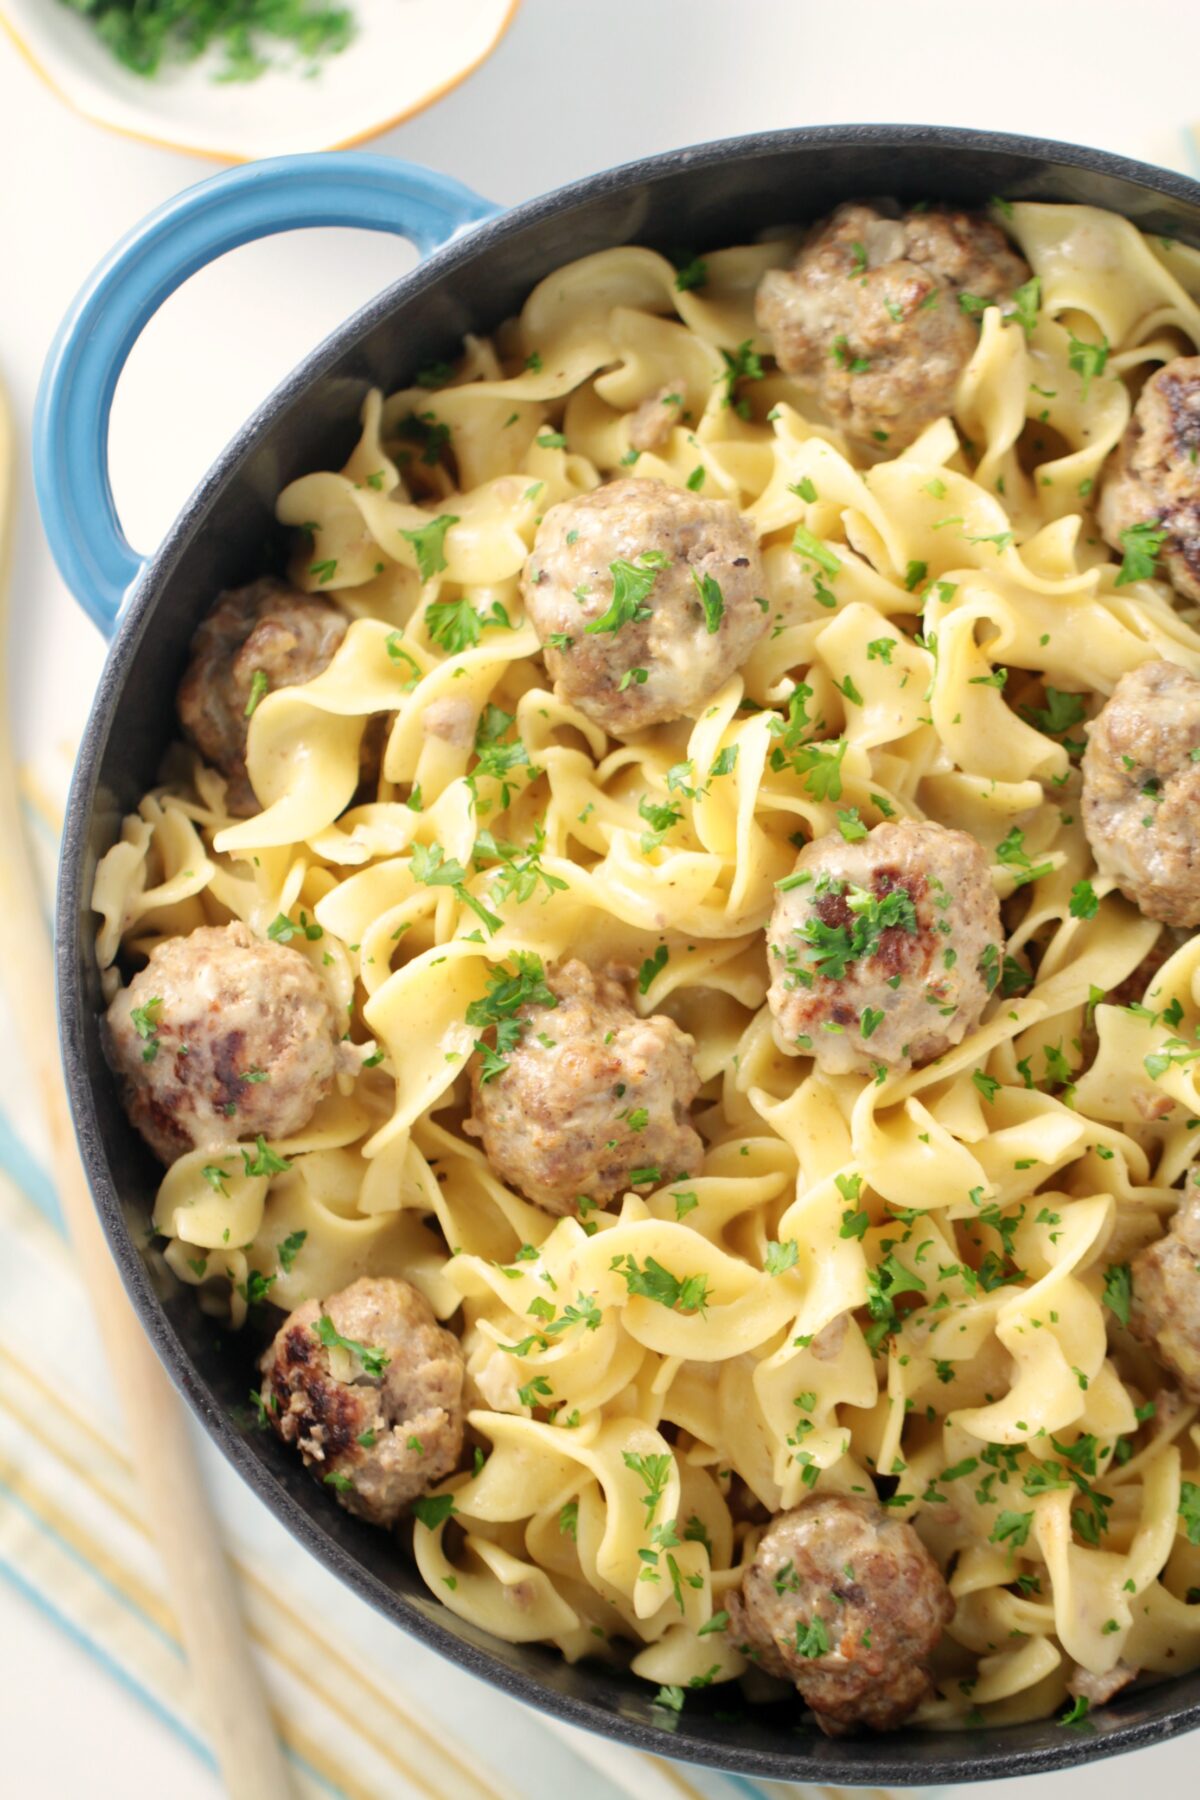 Easy One-Pot Swedish Meatballs with Egg Noodles - your family will love this swedish inspired family meal.